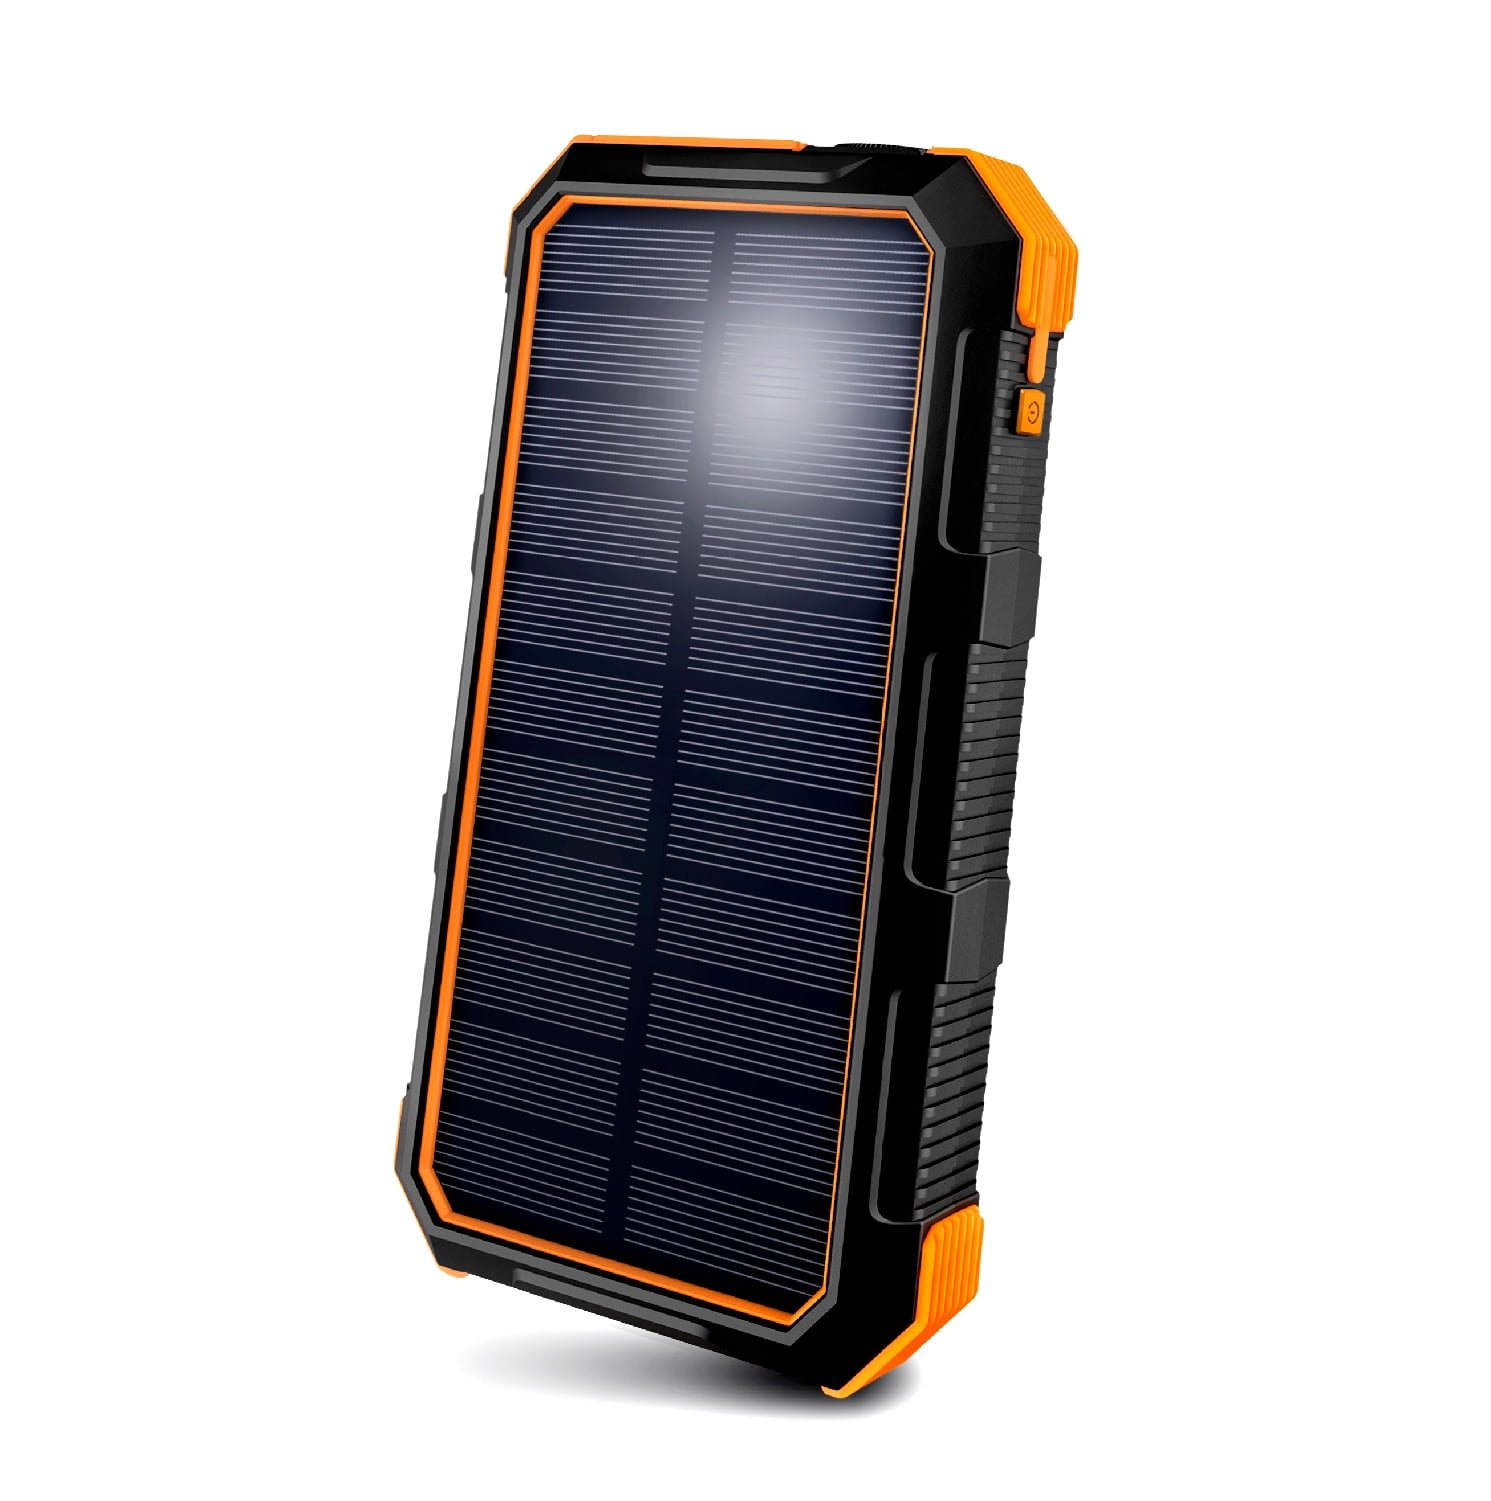 Solar Power Bank,Portable 24000mAh Solar Chargers High Capacity Solar Panel Cellphone Chargers Waterproof/Shockproof/Dustproof Solar External Battery Dual USB Backup with Strong LED Lights for IPhone,Android and More USB Devices